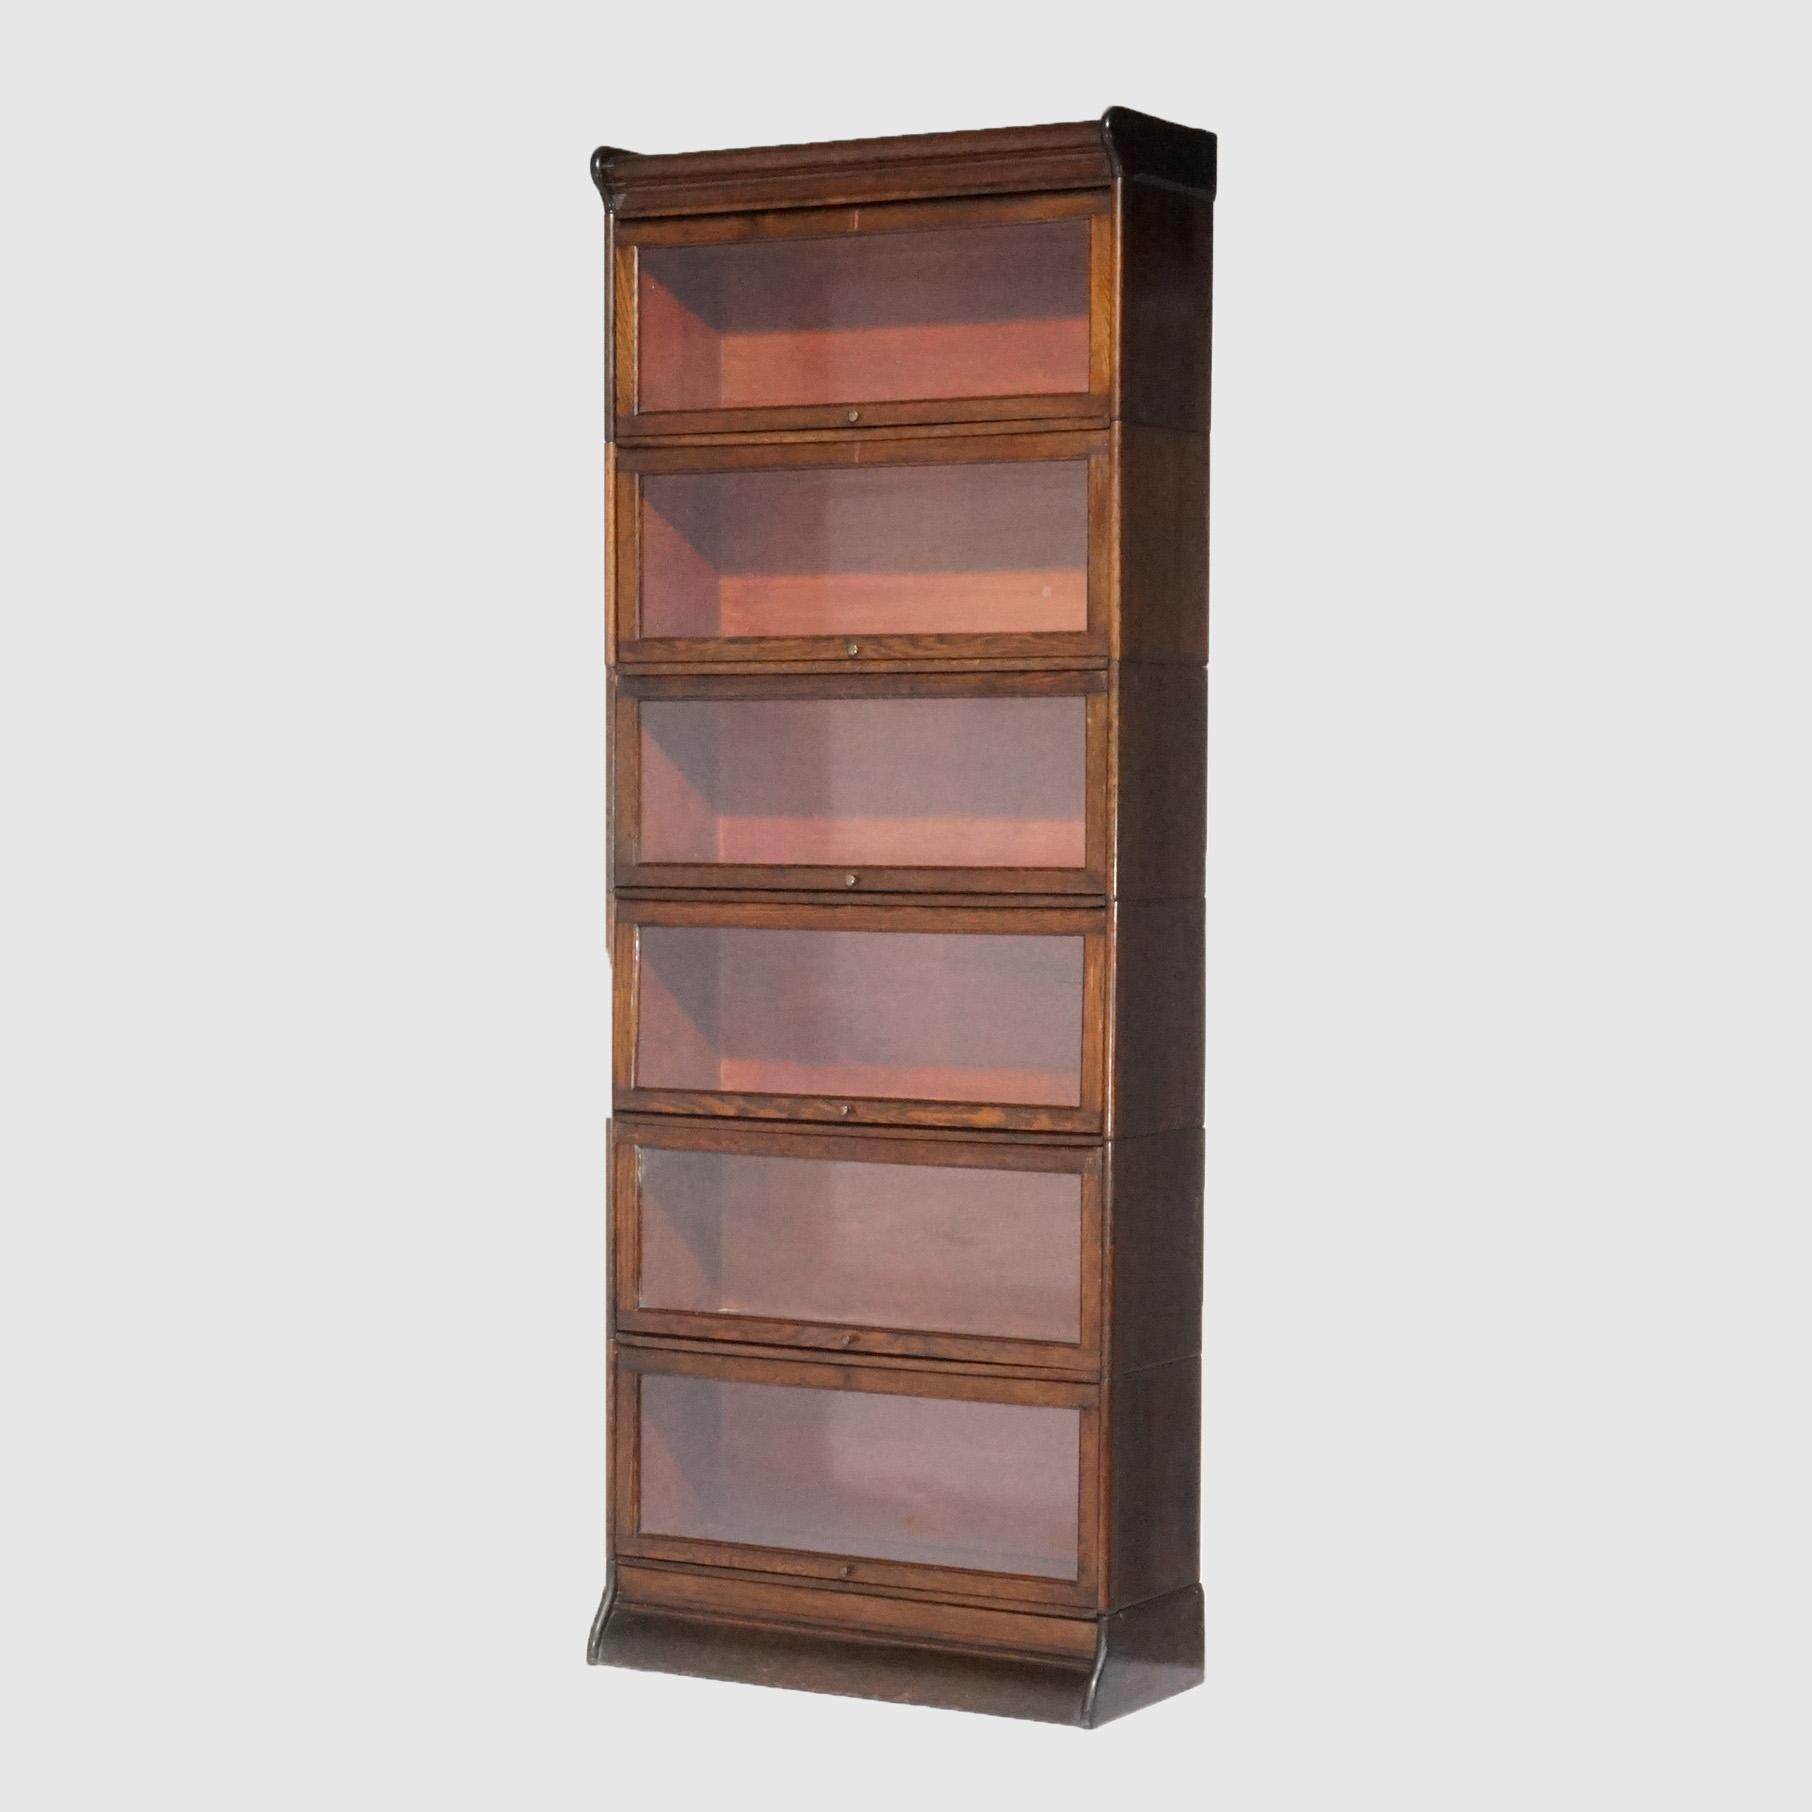 An antique Arts and Crafts barrister bookcase offers oak construction with six stacks, each having pull-out glass doors; raised on ogee base, c1910

Measures: 63''H x 34.5''W x 11.75''D; interior shelf height: 10'' 

Catalogue Note: Ask about